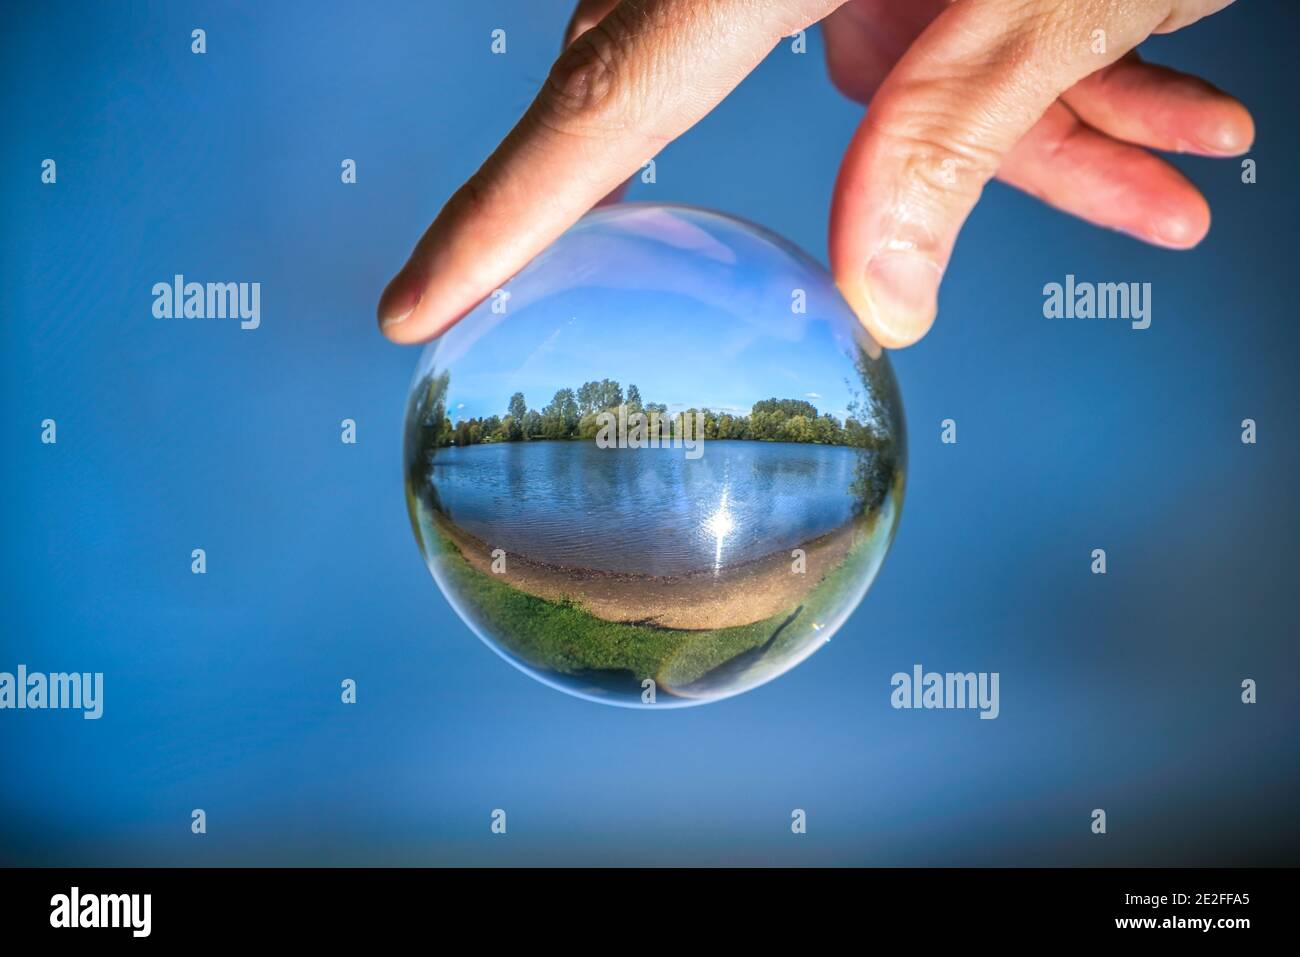 Environmental conservation concept to take care of the planet with human hand holding globe shape Stock Photo